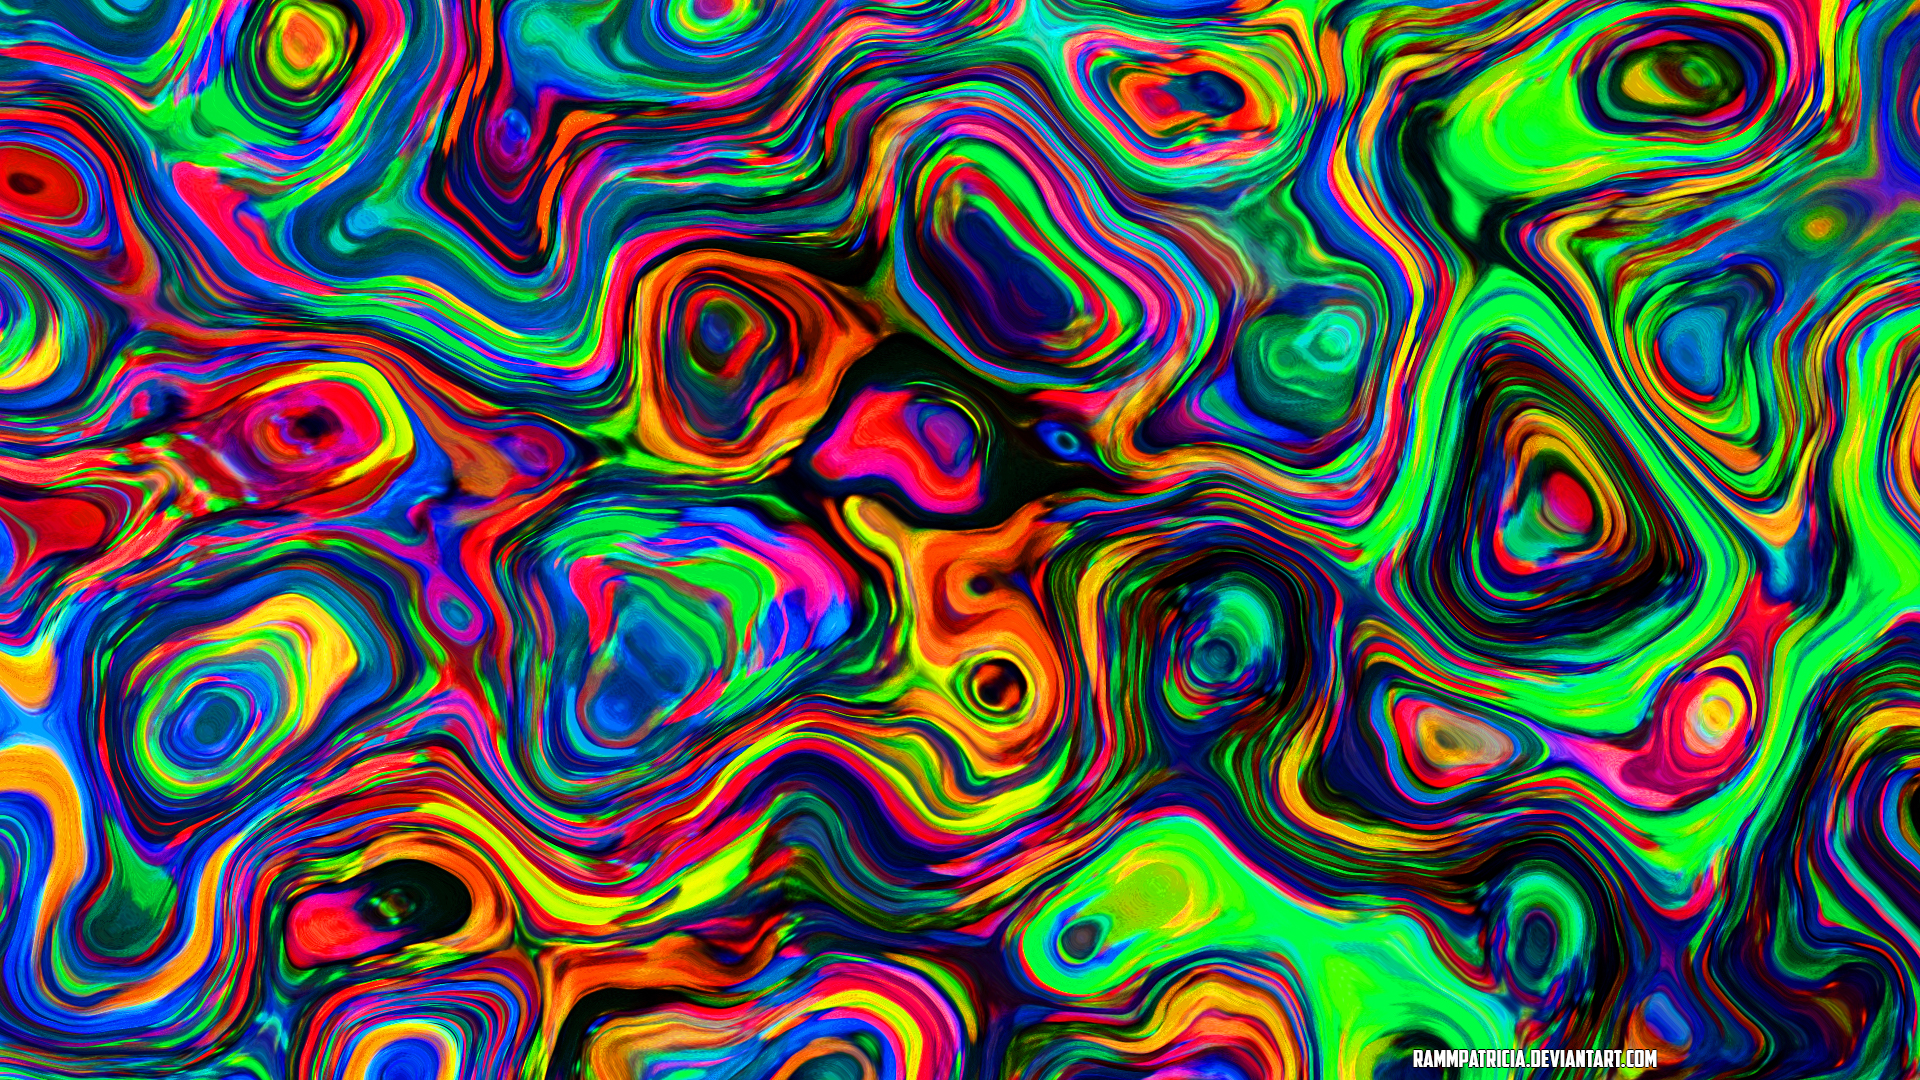 General 1920x1080 abstract colorful digital art RammPatricia watermarked